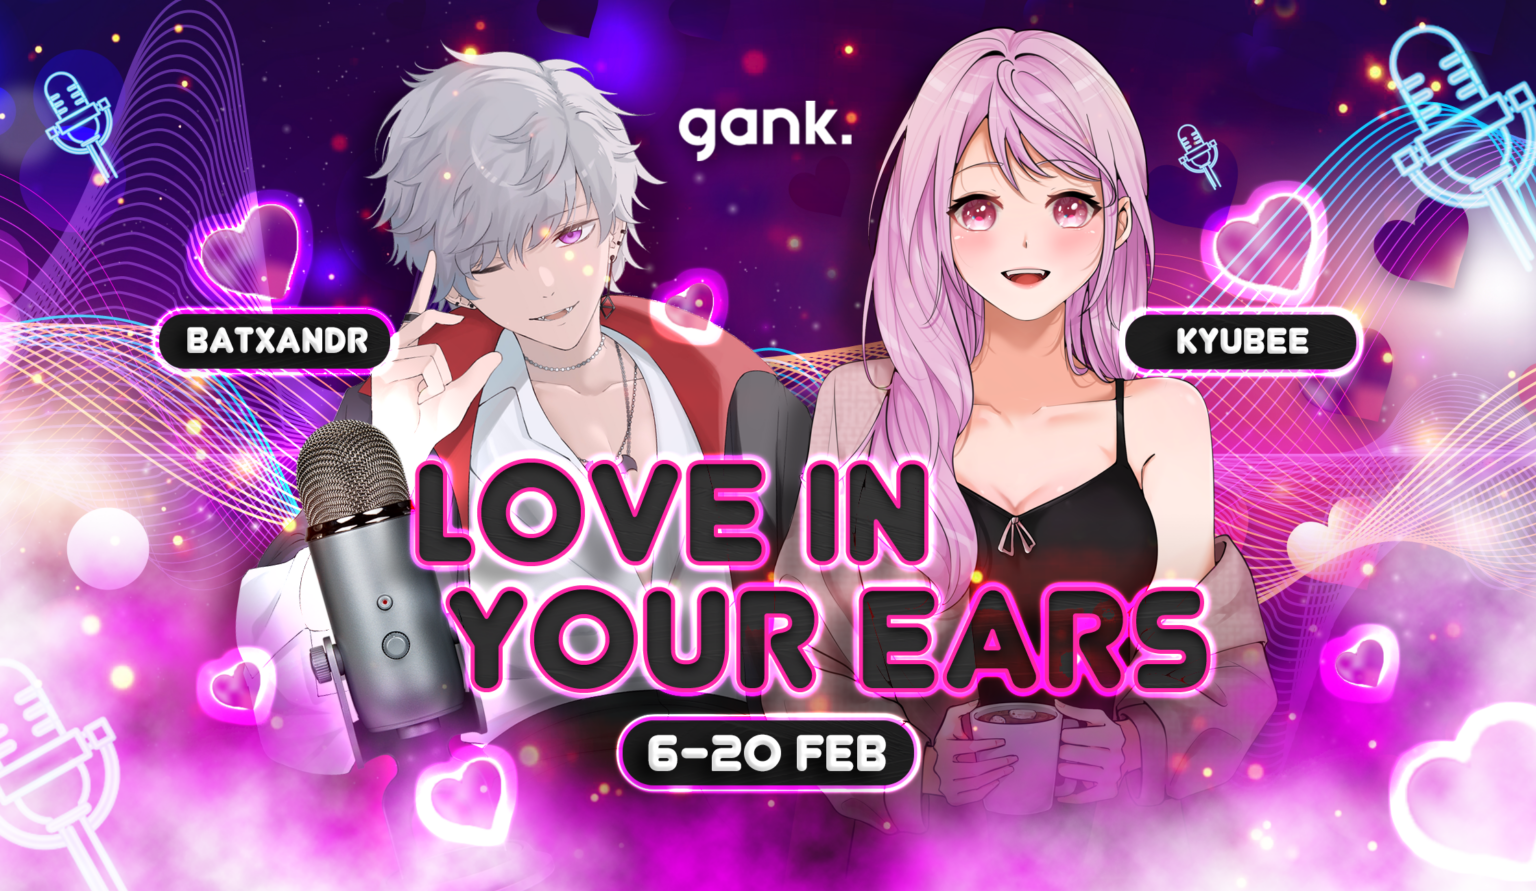 [ID] Love in your ears